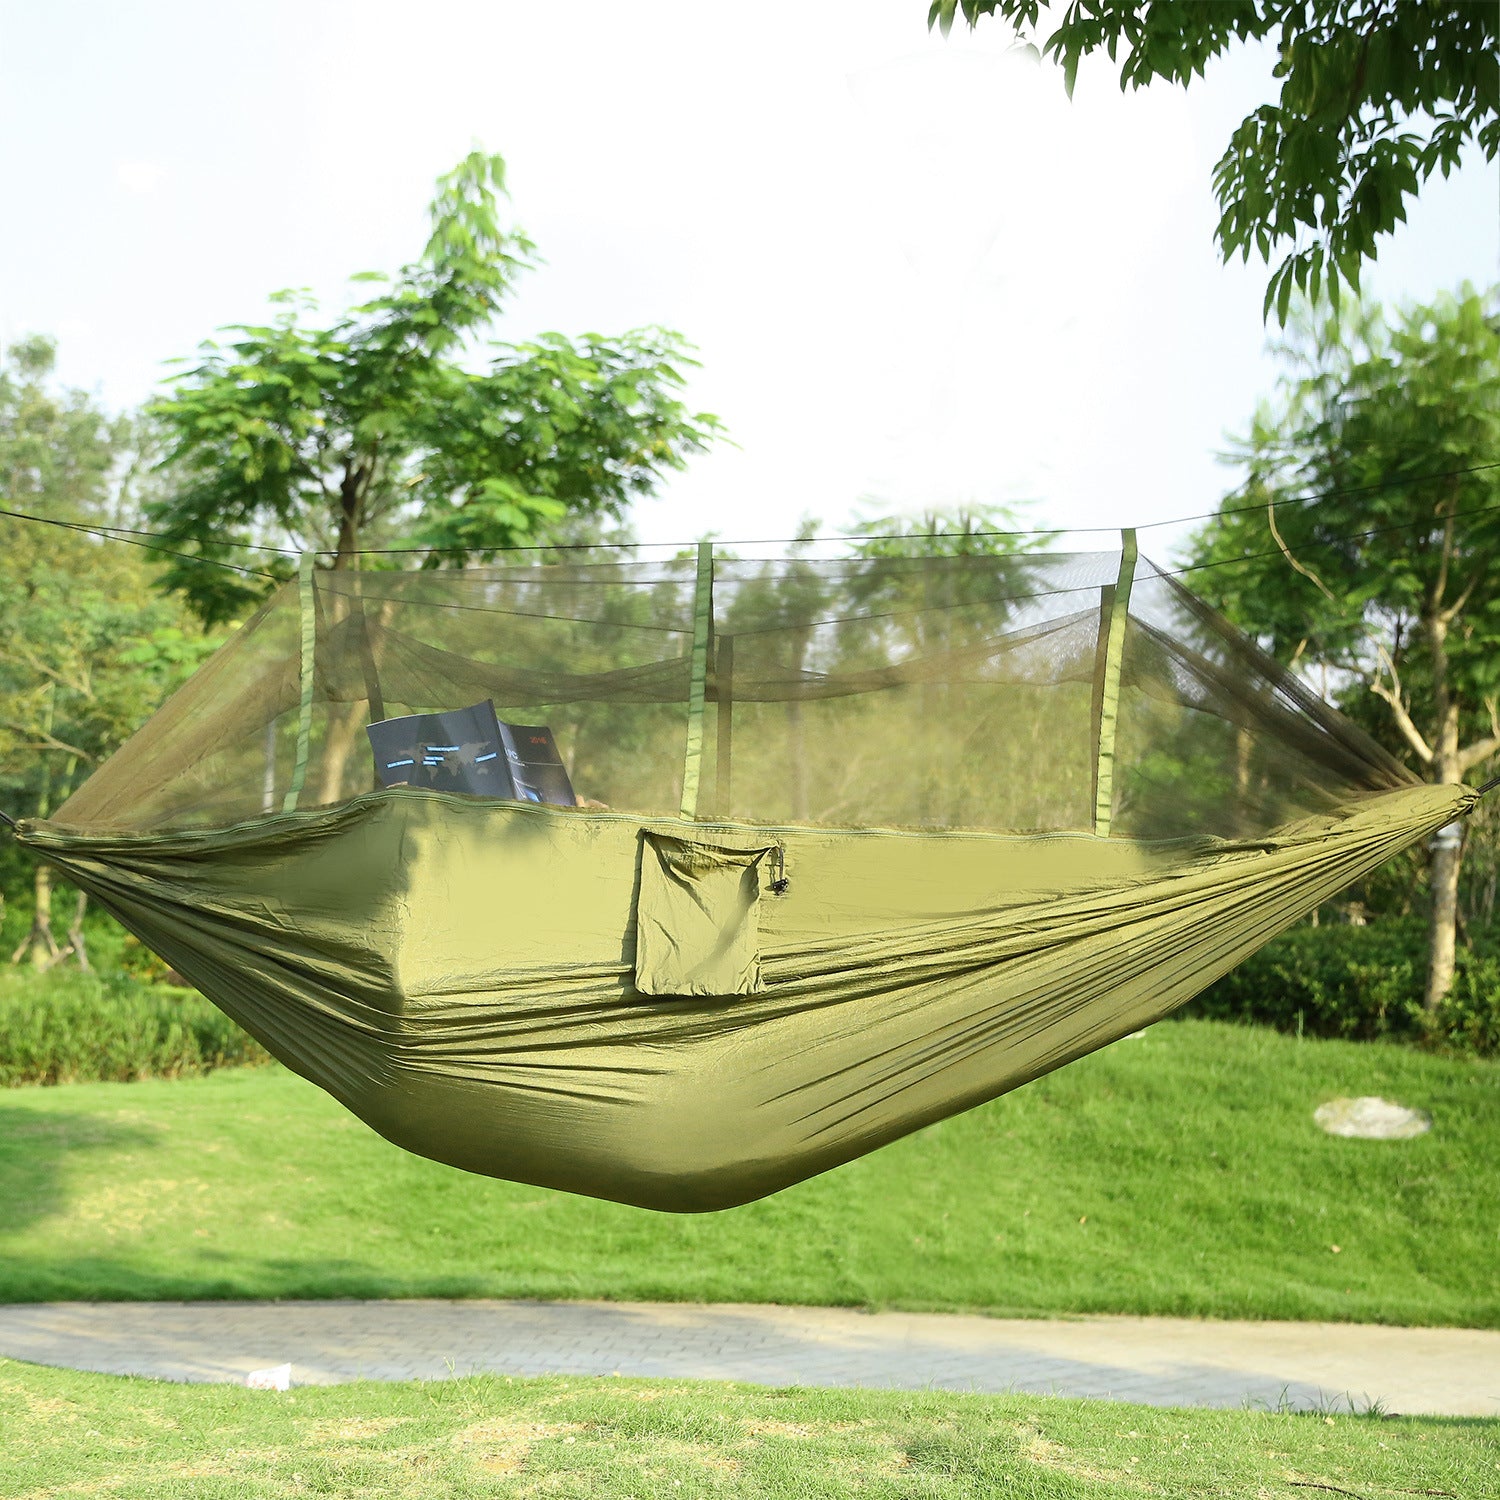 600lbs Load 2 Persons Hammock with Mosquito Net Outdoor Hiking Camping Portable Nylon Swing Hanging Bed - DragonHearth